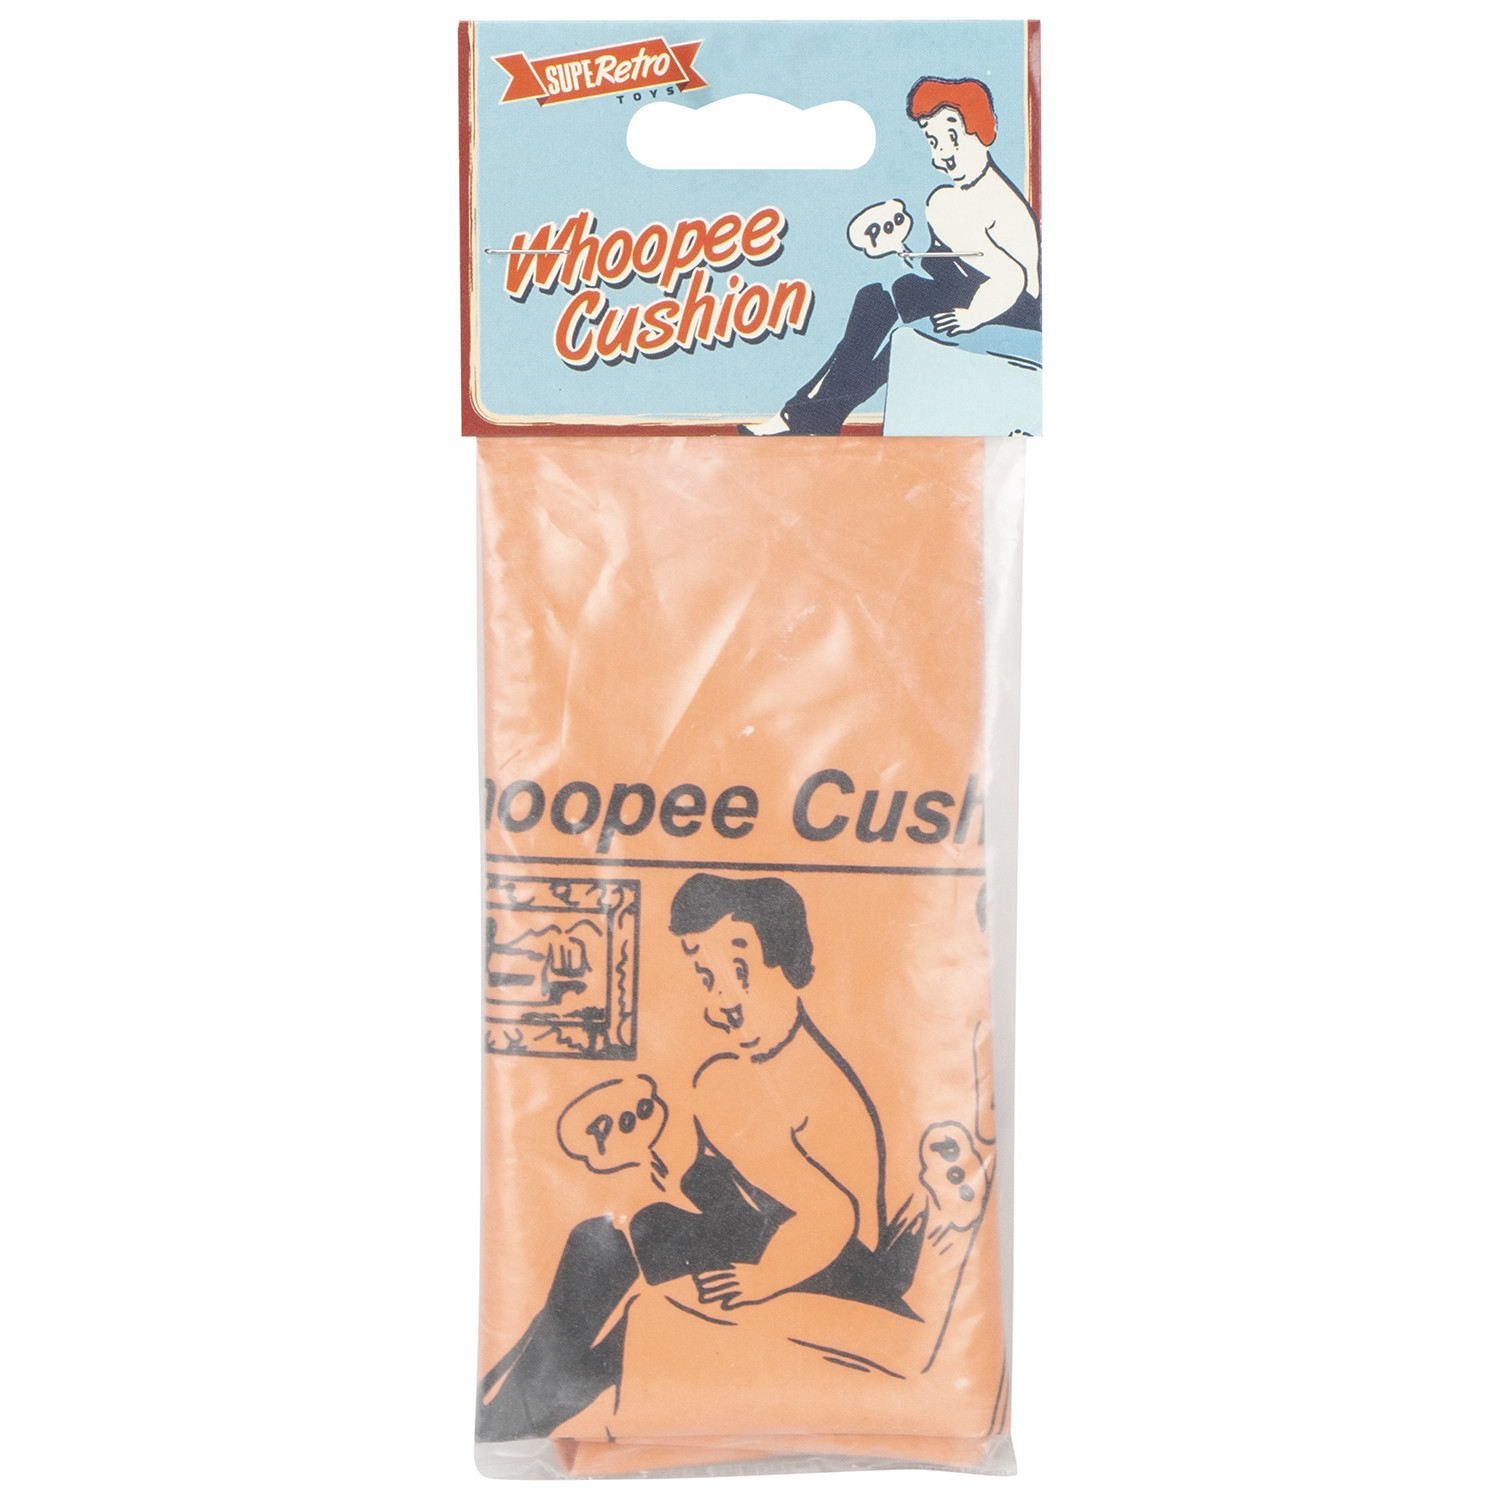 Single Super Retro Whoopee Cushion in Assorted styles Image 3